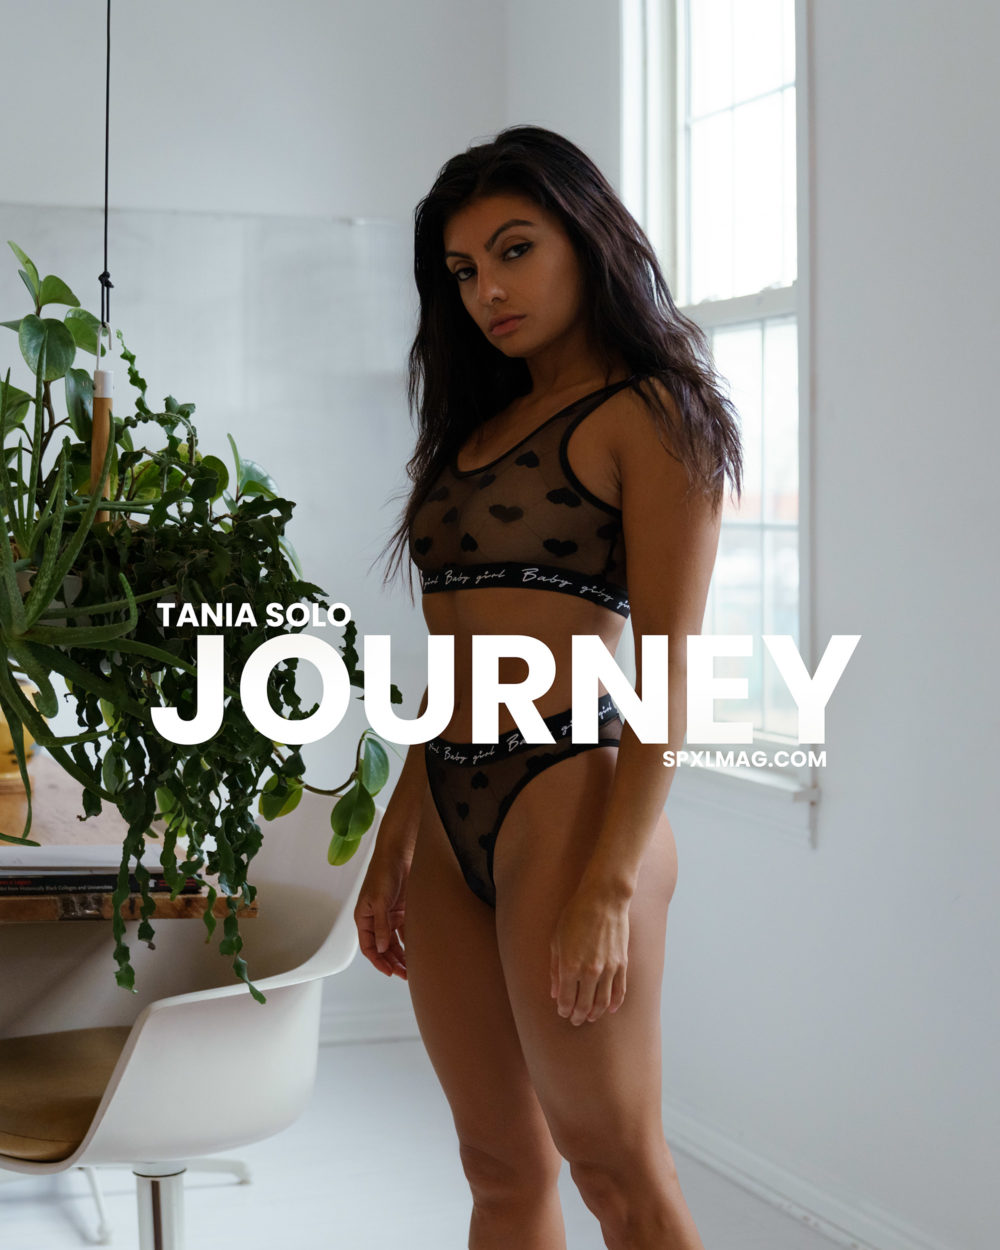 tania solo journey spxlmag product cover DSC07803